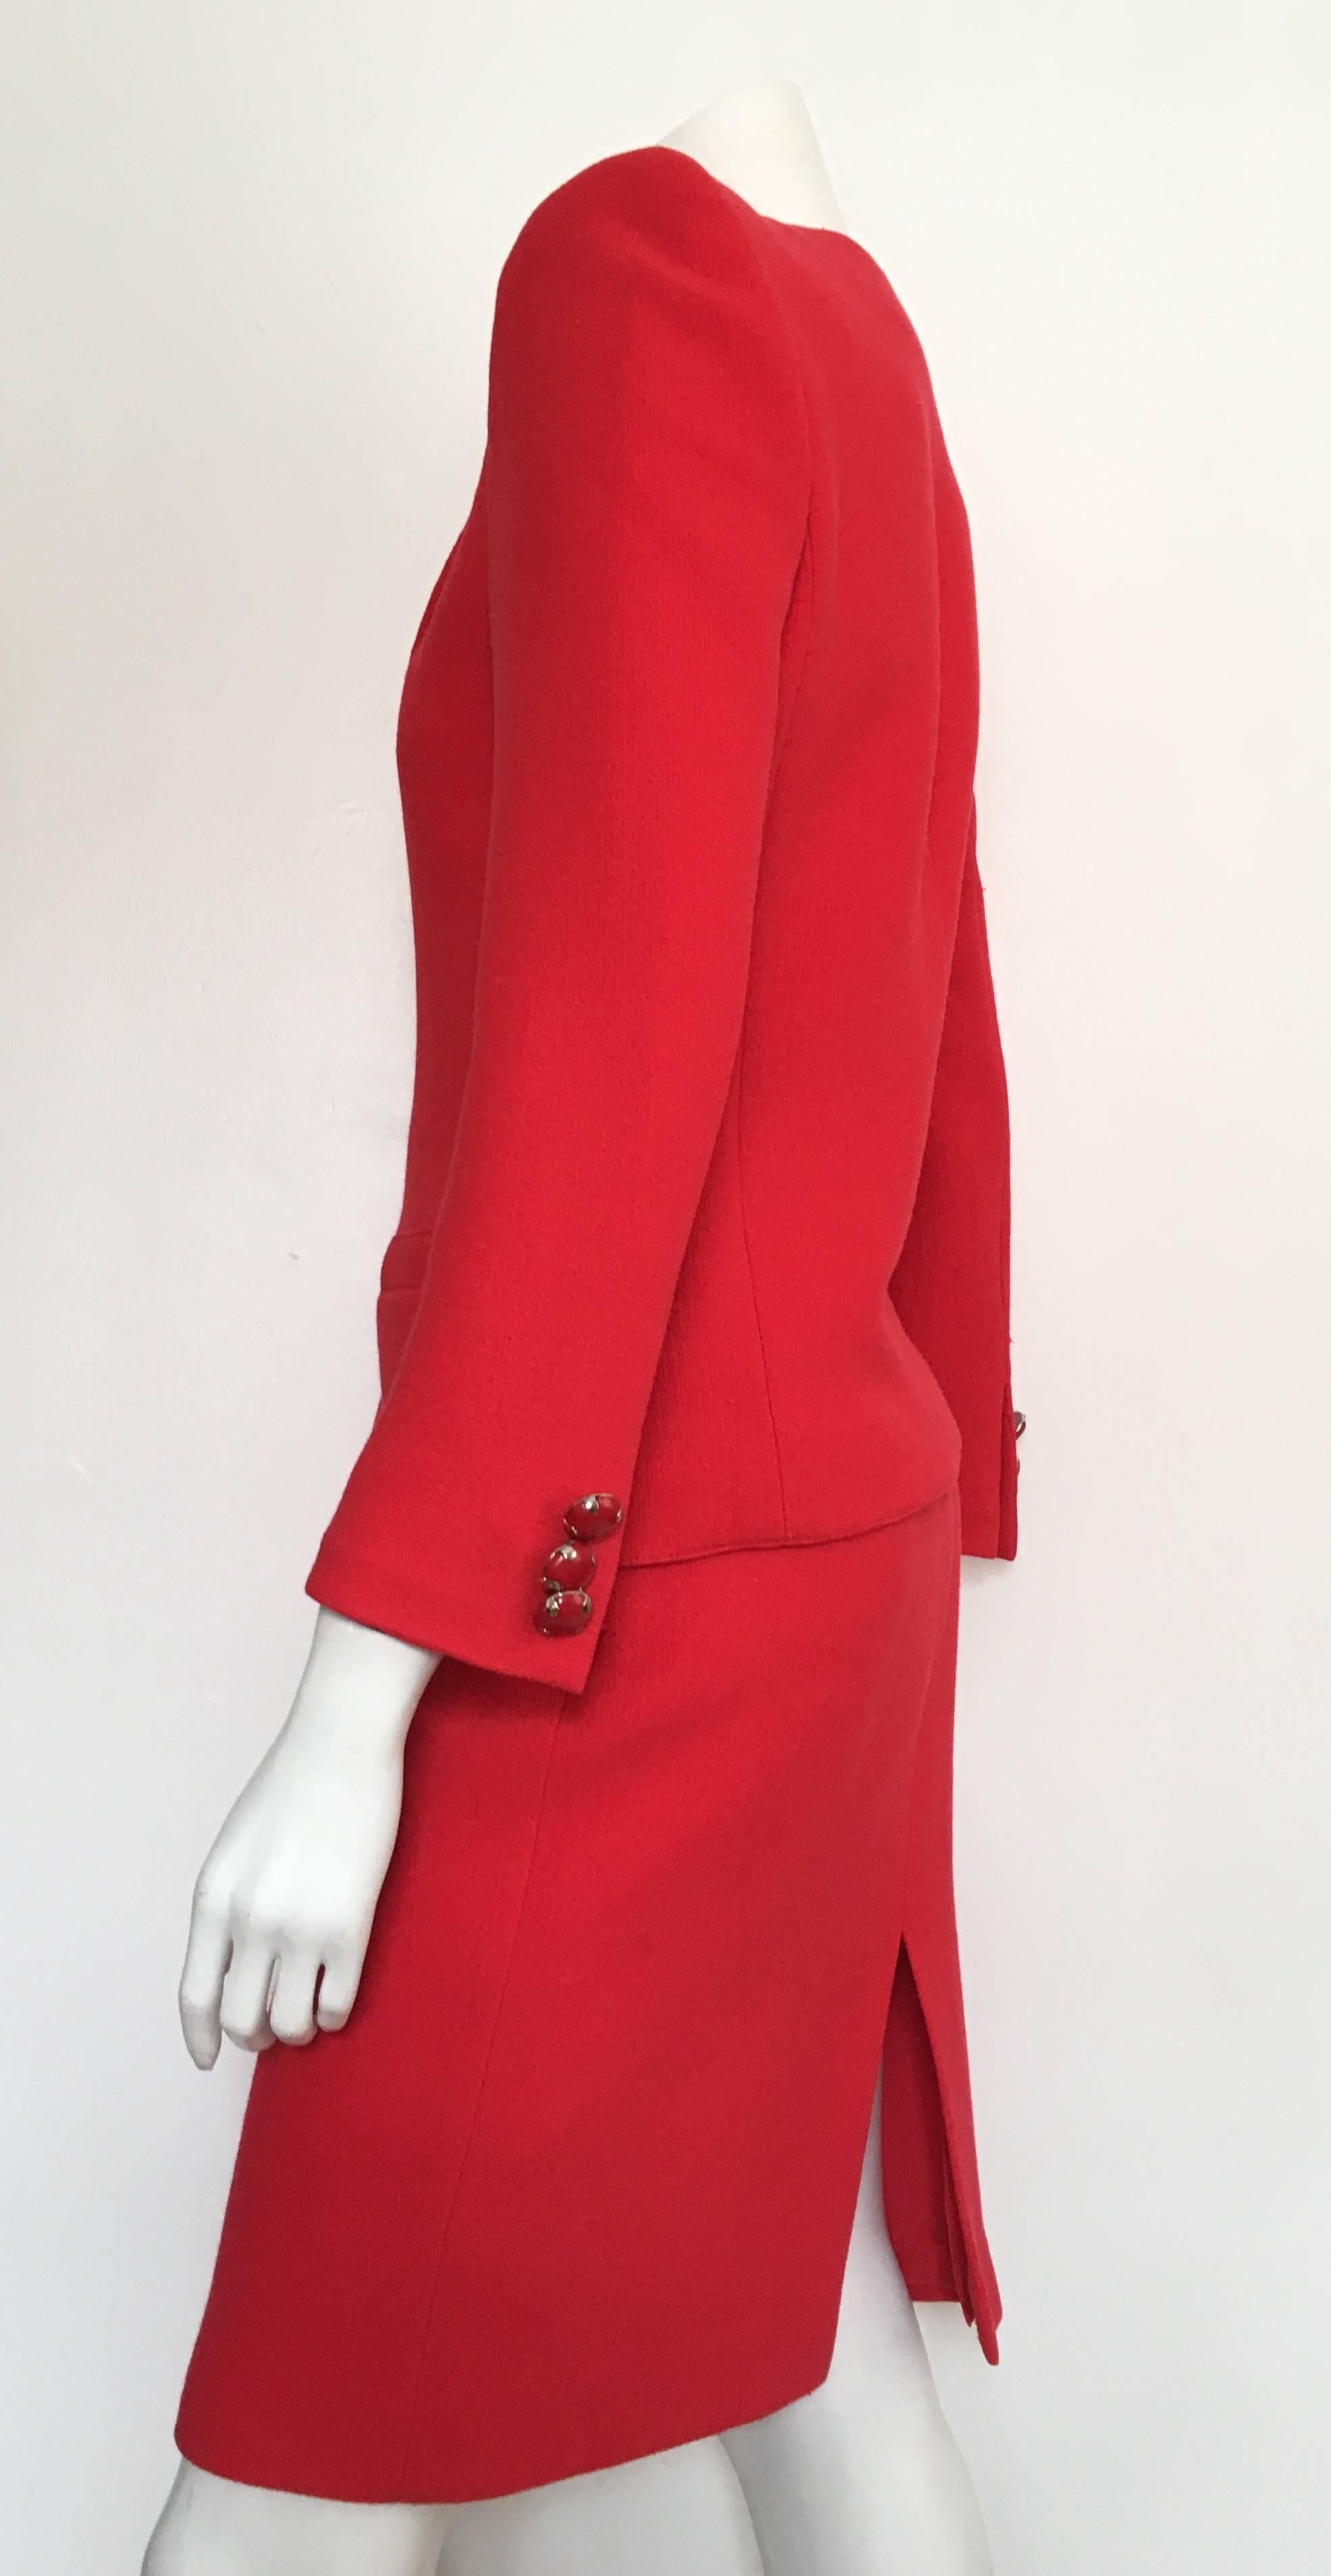 Emanuel Ungaro Red Power Wool Crepe Suit Size 6, 1990s For Sale 2